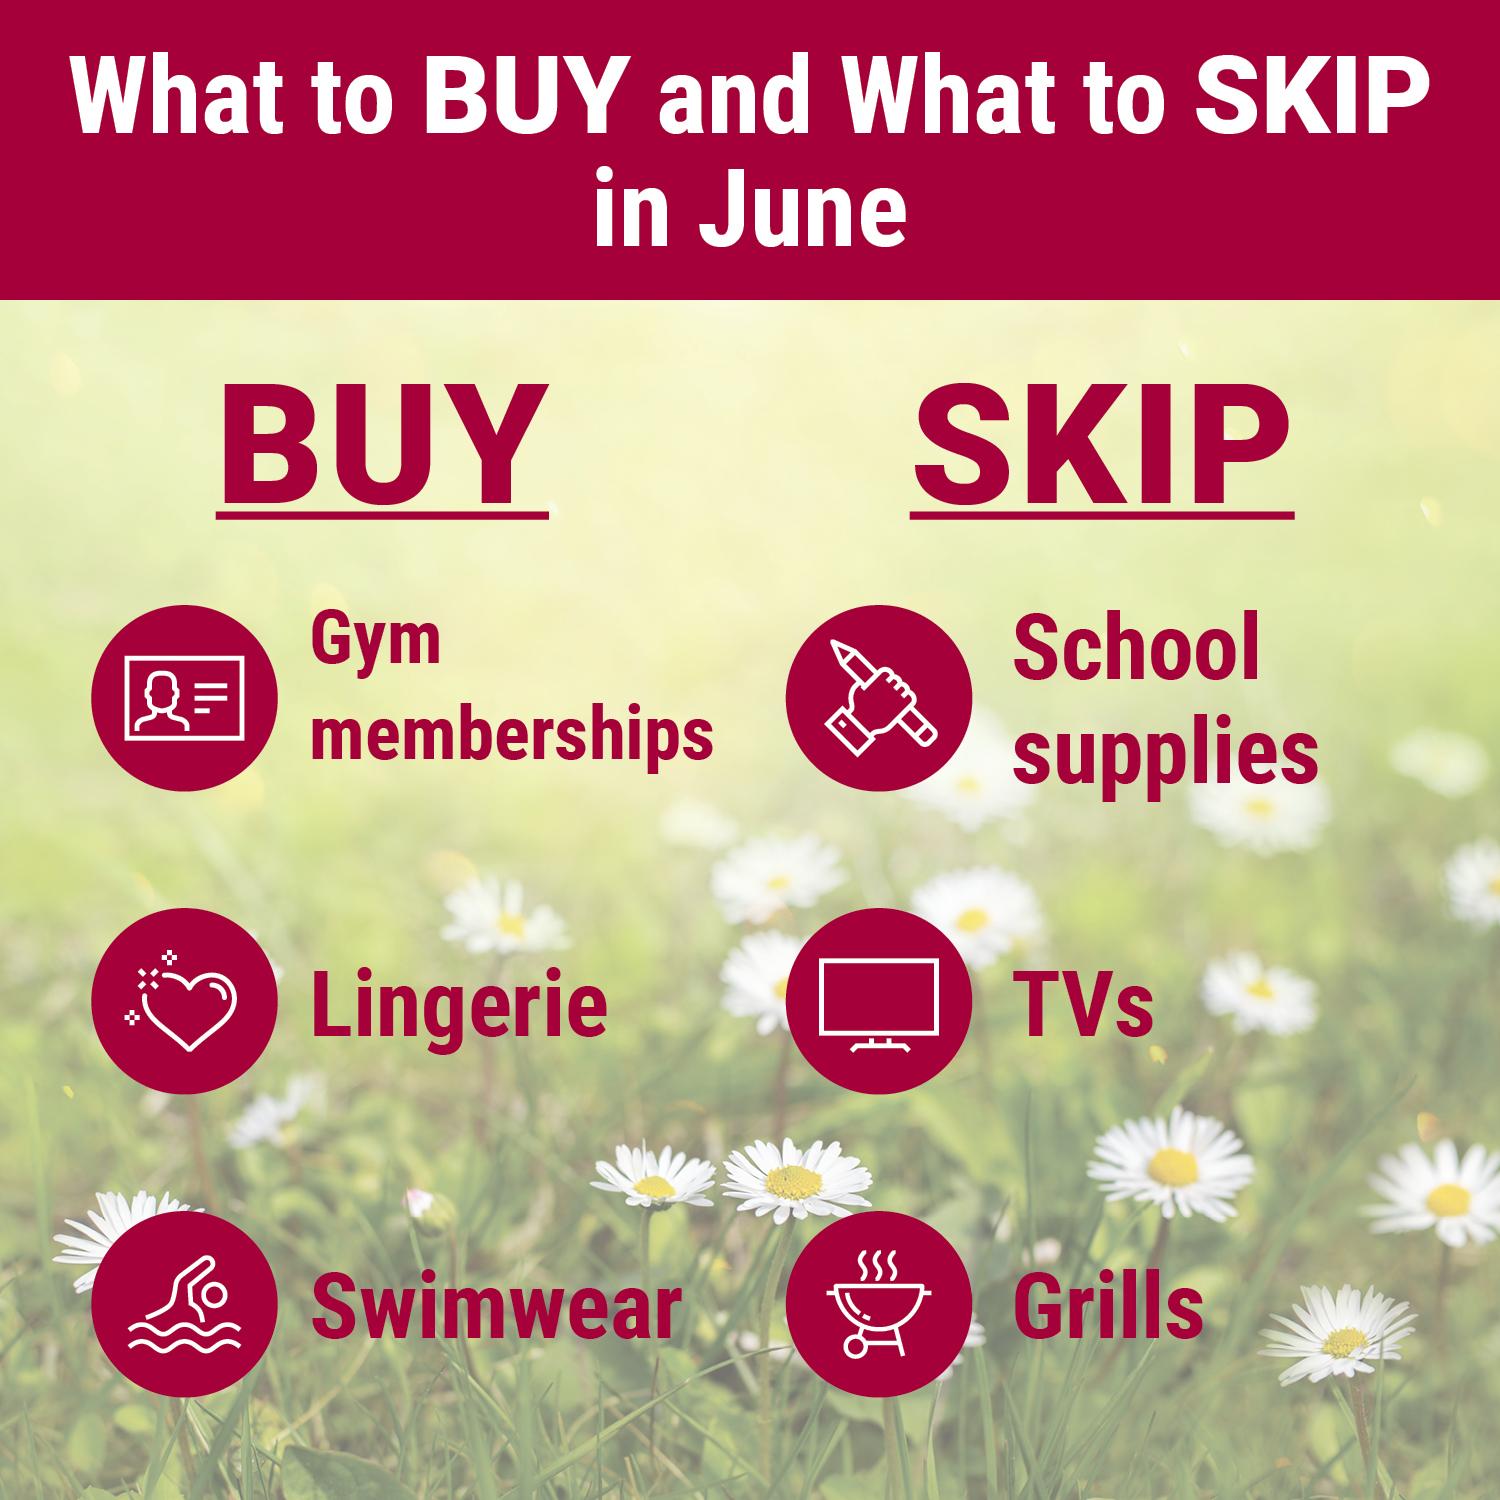 What to buy and what to skip in June